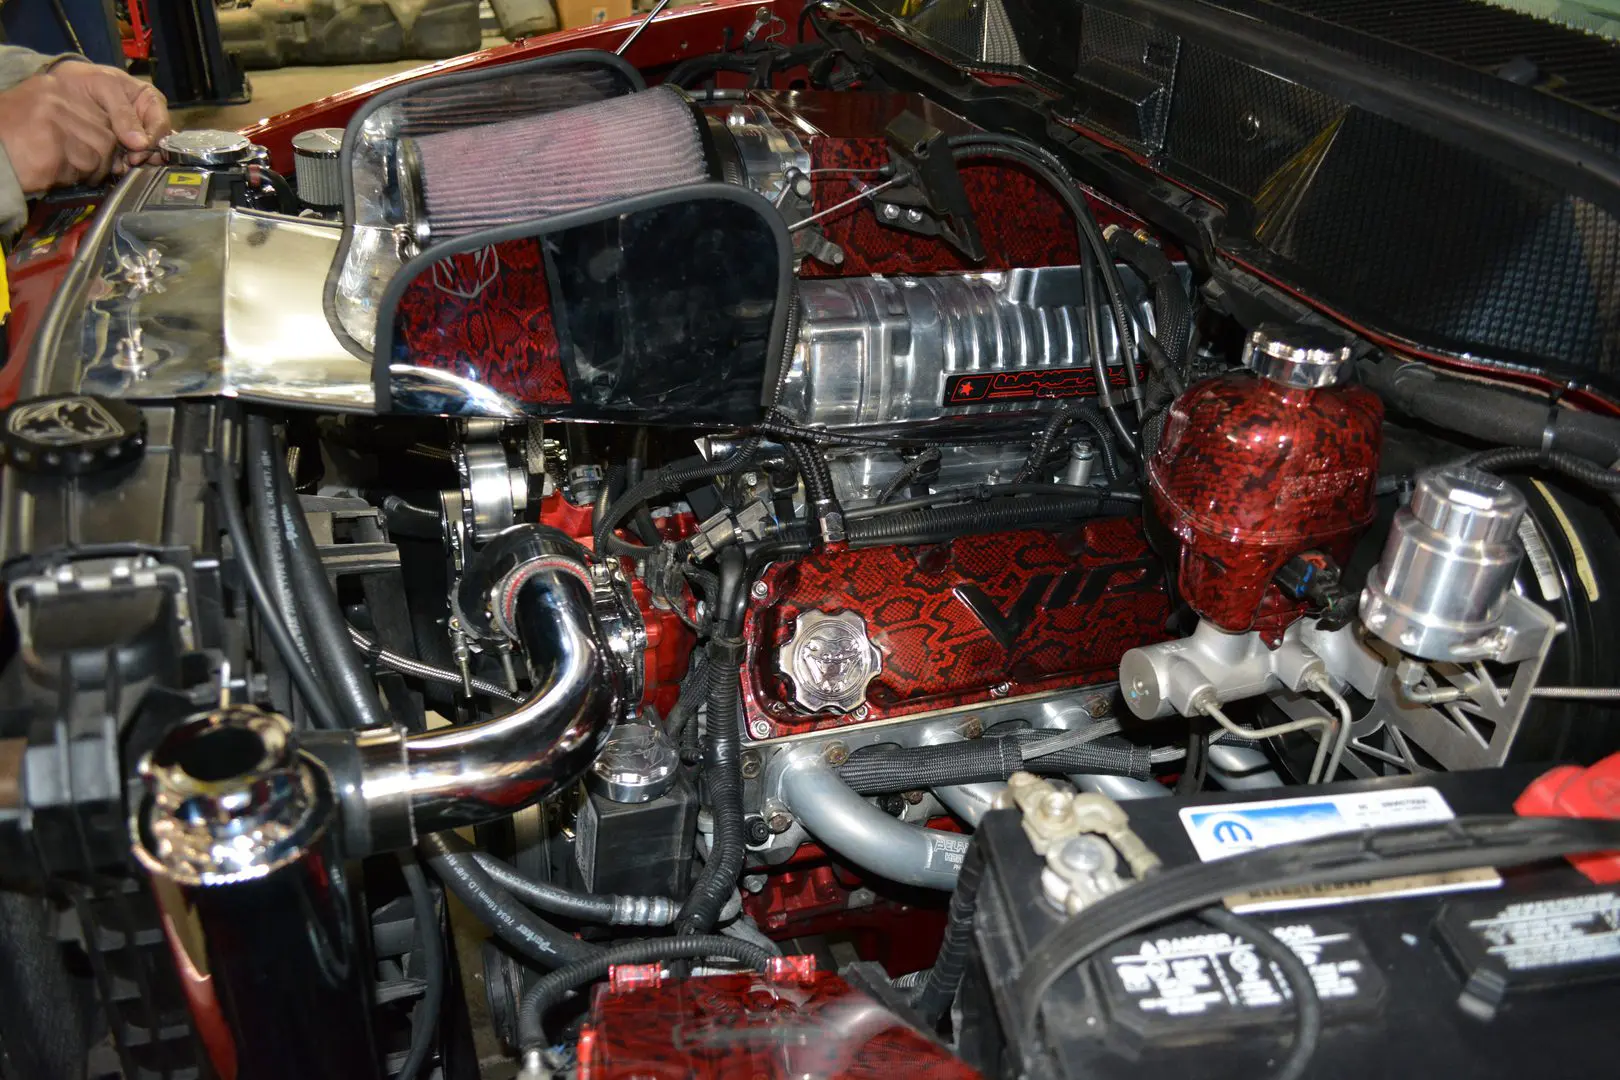 A red motorcycle engine with the cover removed.